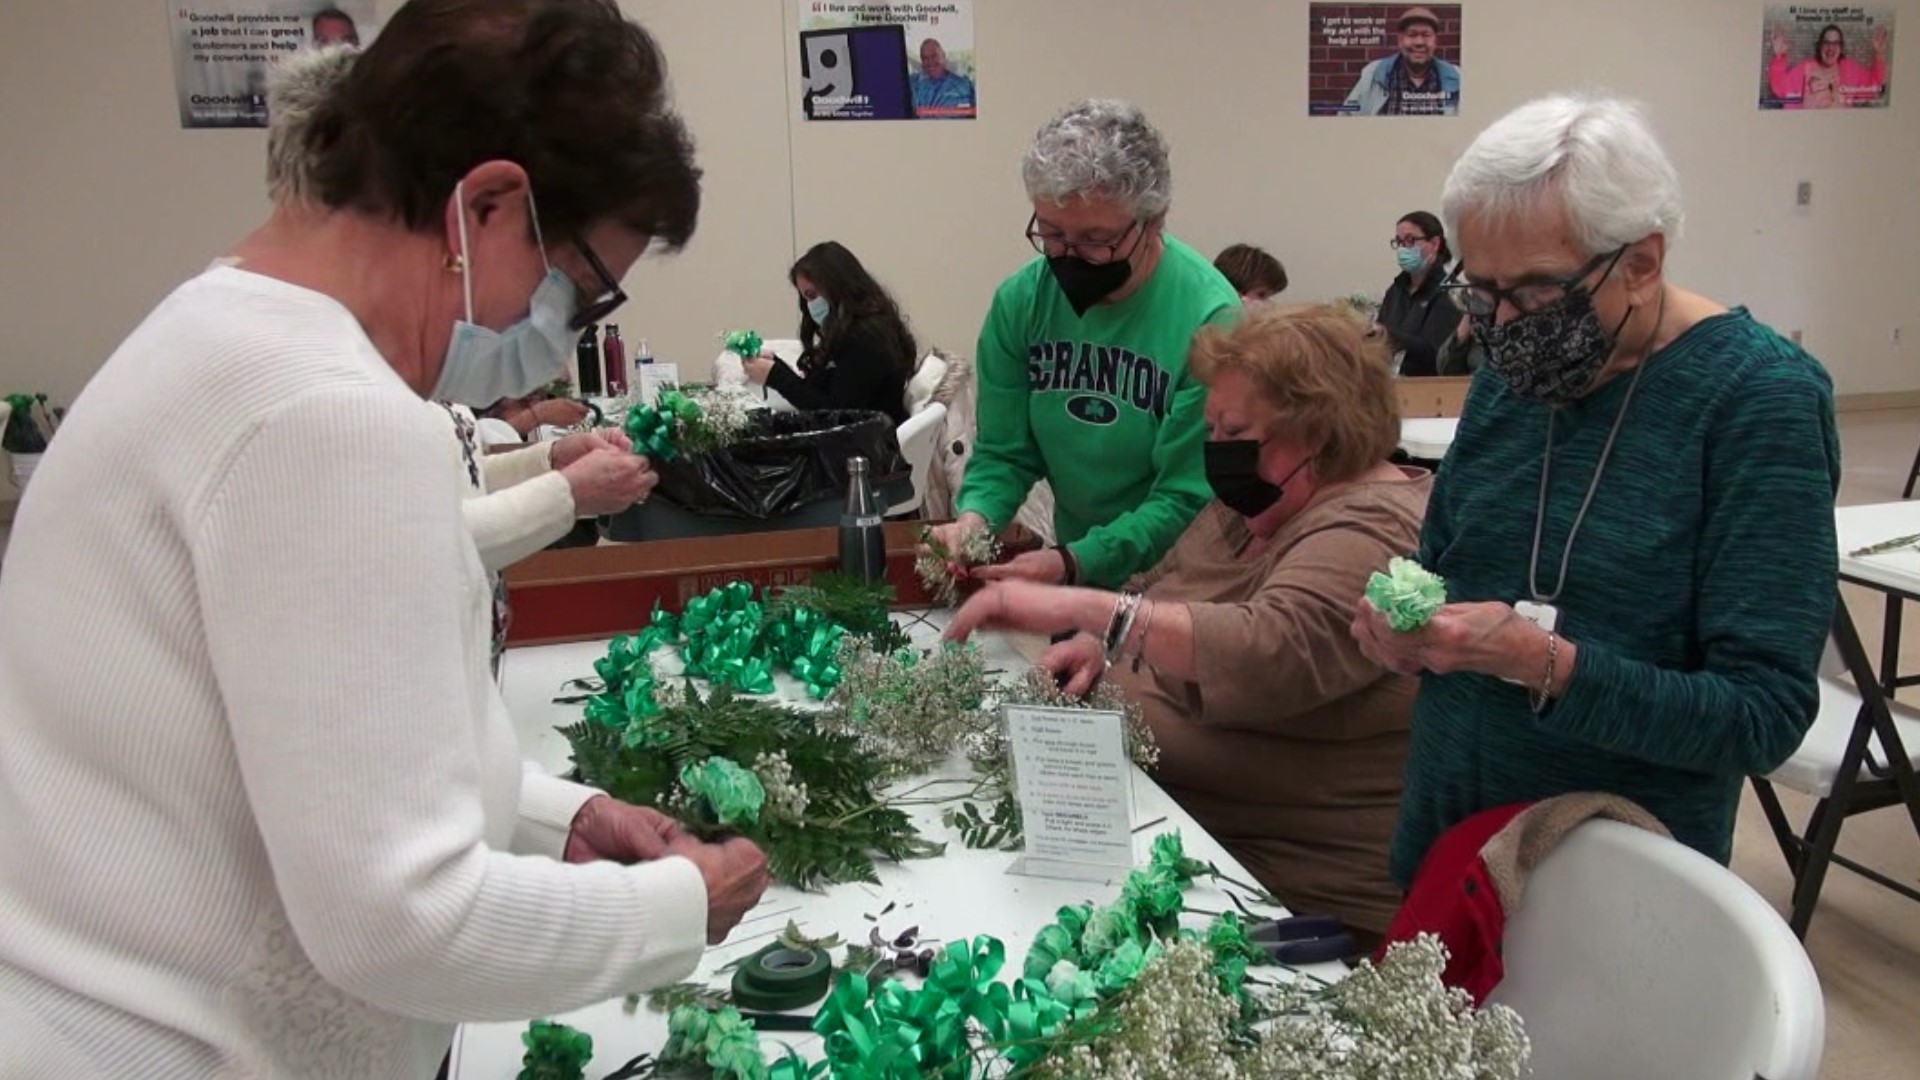 A group in Lackawanna County continued a long-time St. Patrick's Day tradition on Monday.